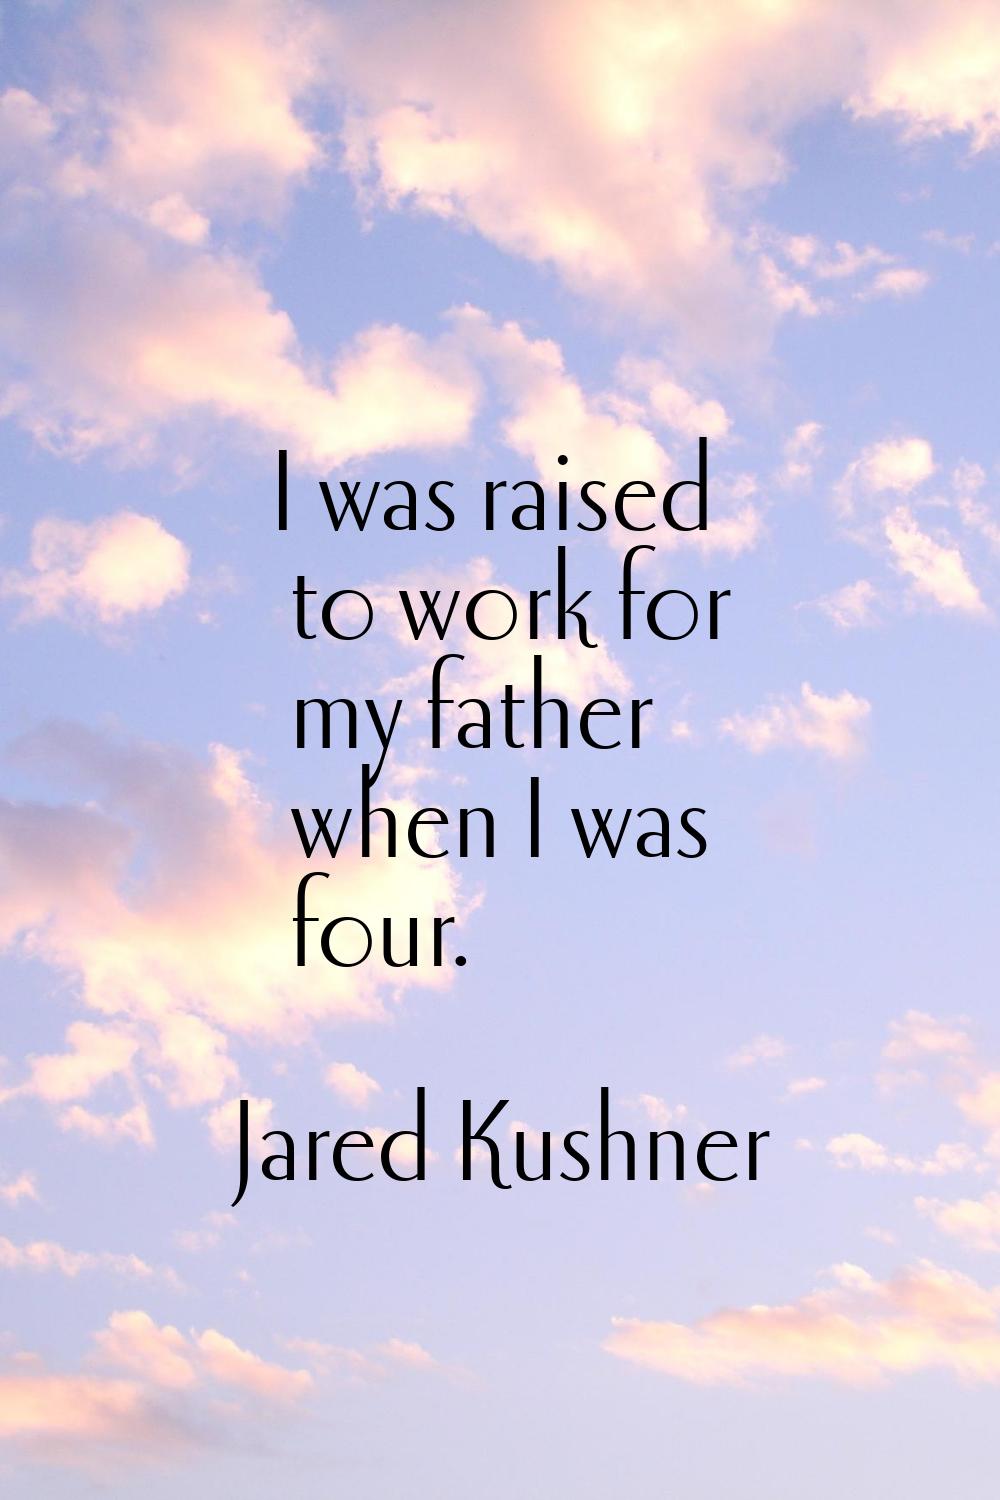 I was raised to work for my father when I was four.